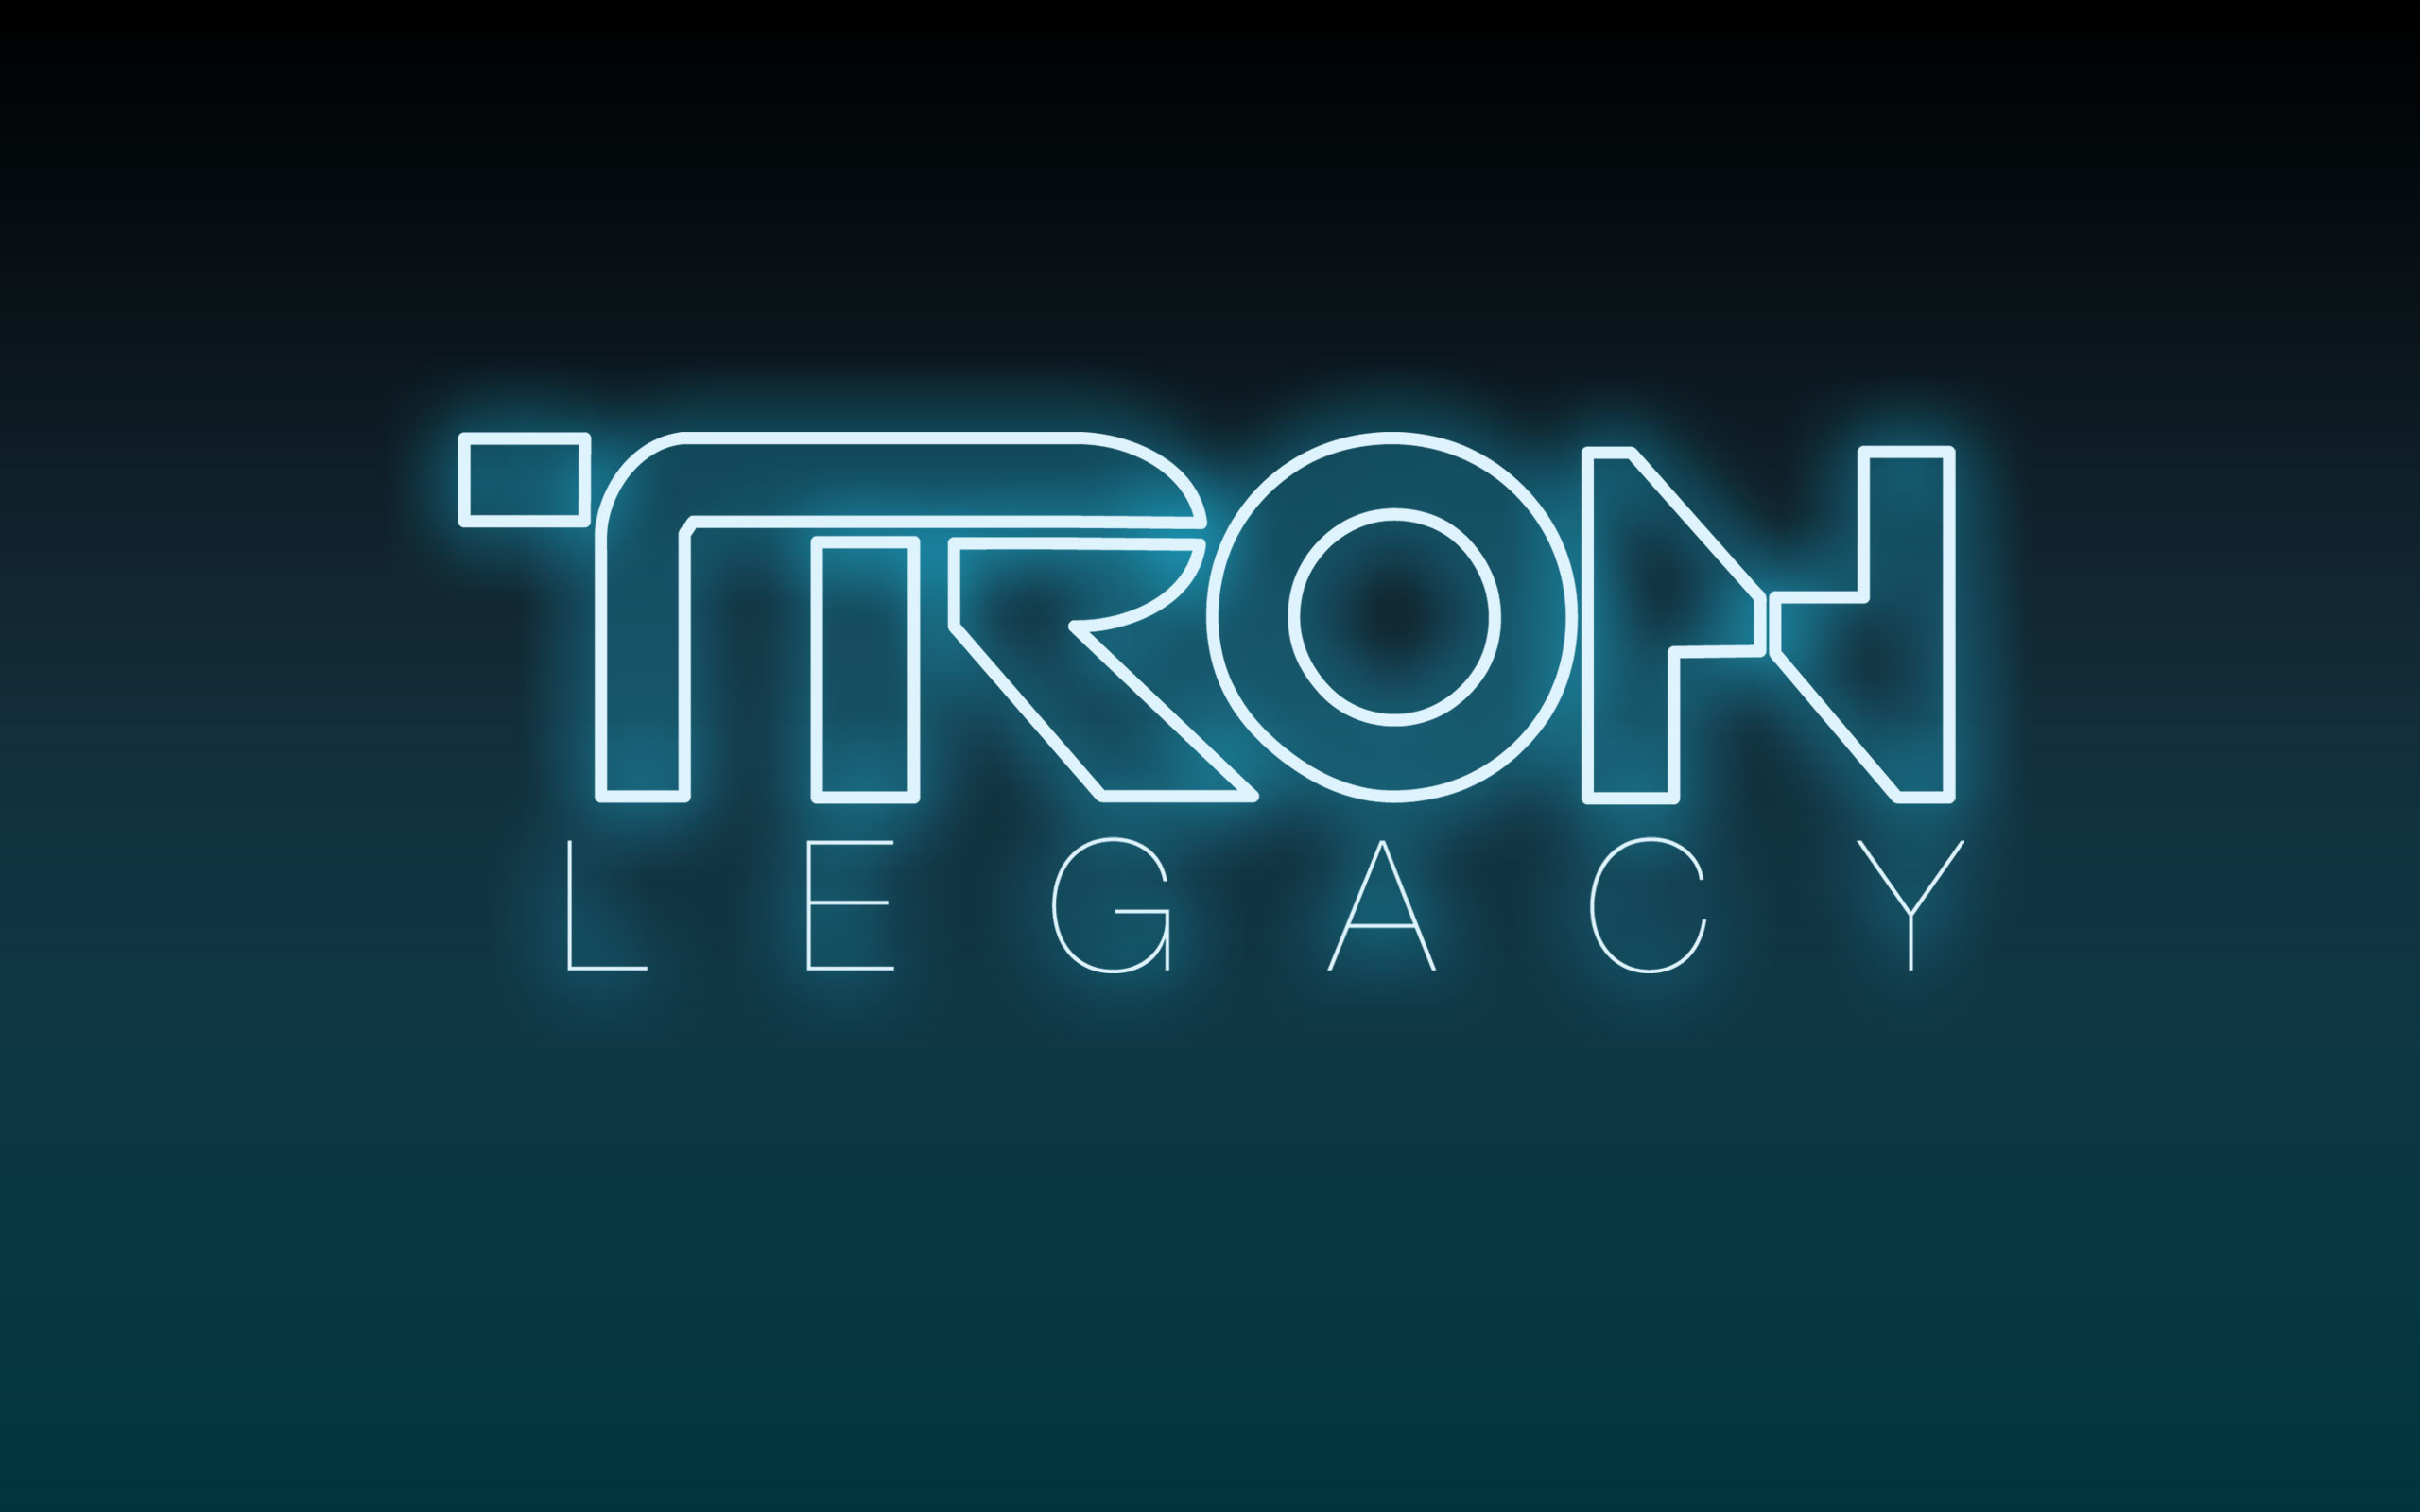 Disneys Tron Legacy Movie Logo wallpaper – Click picture for high resolution HD wallpaper